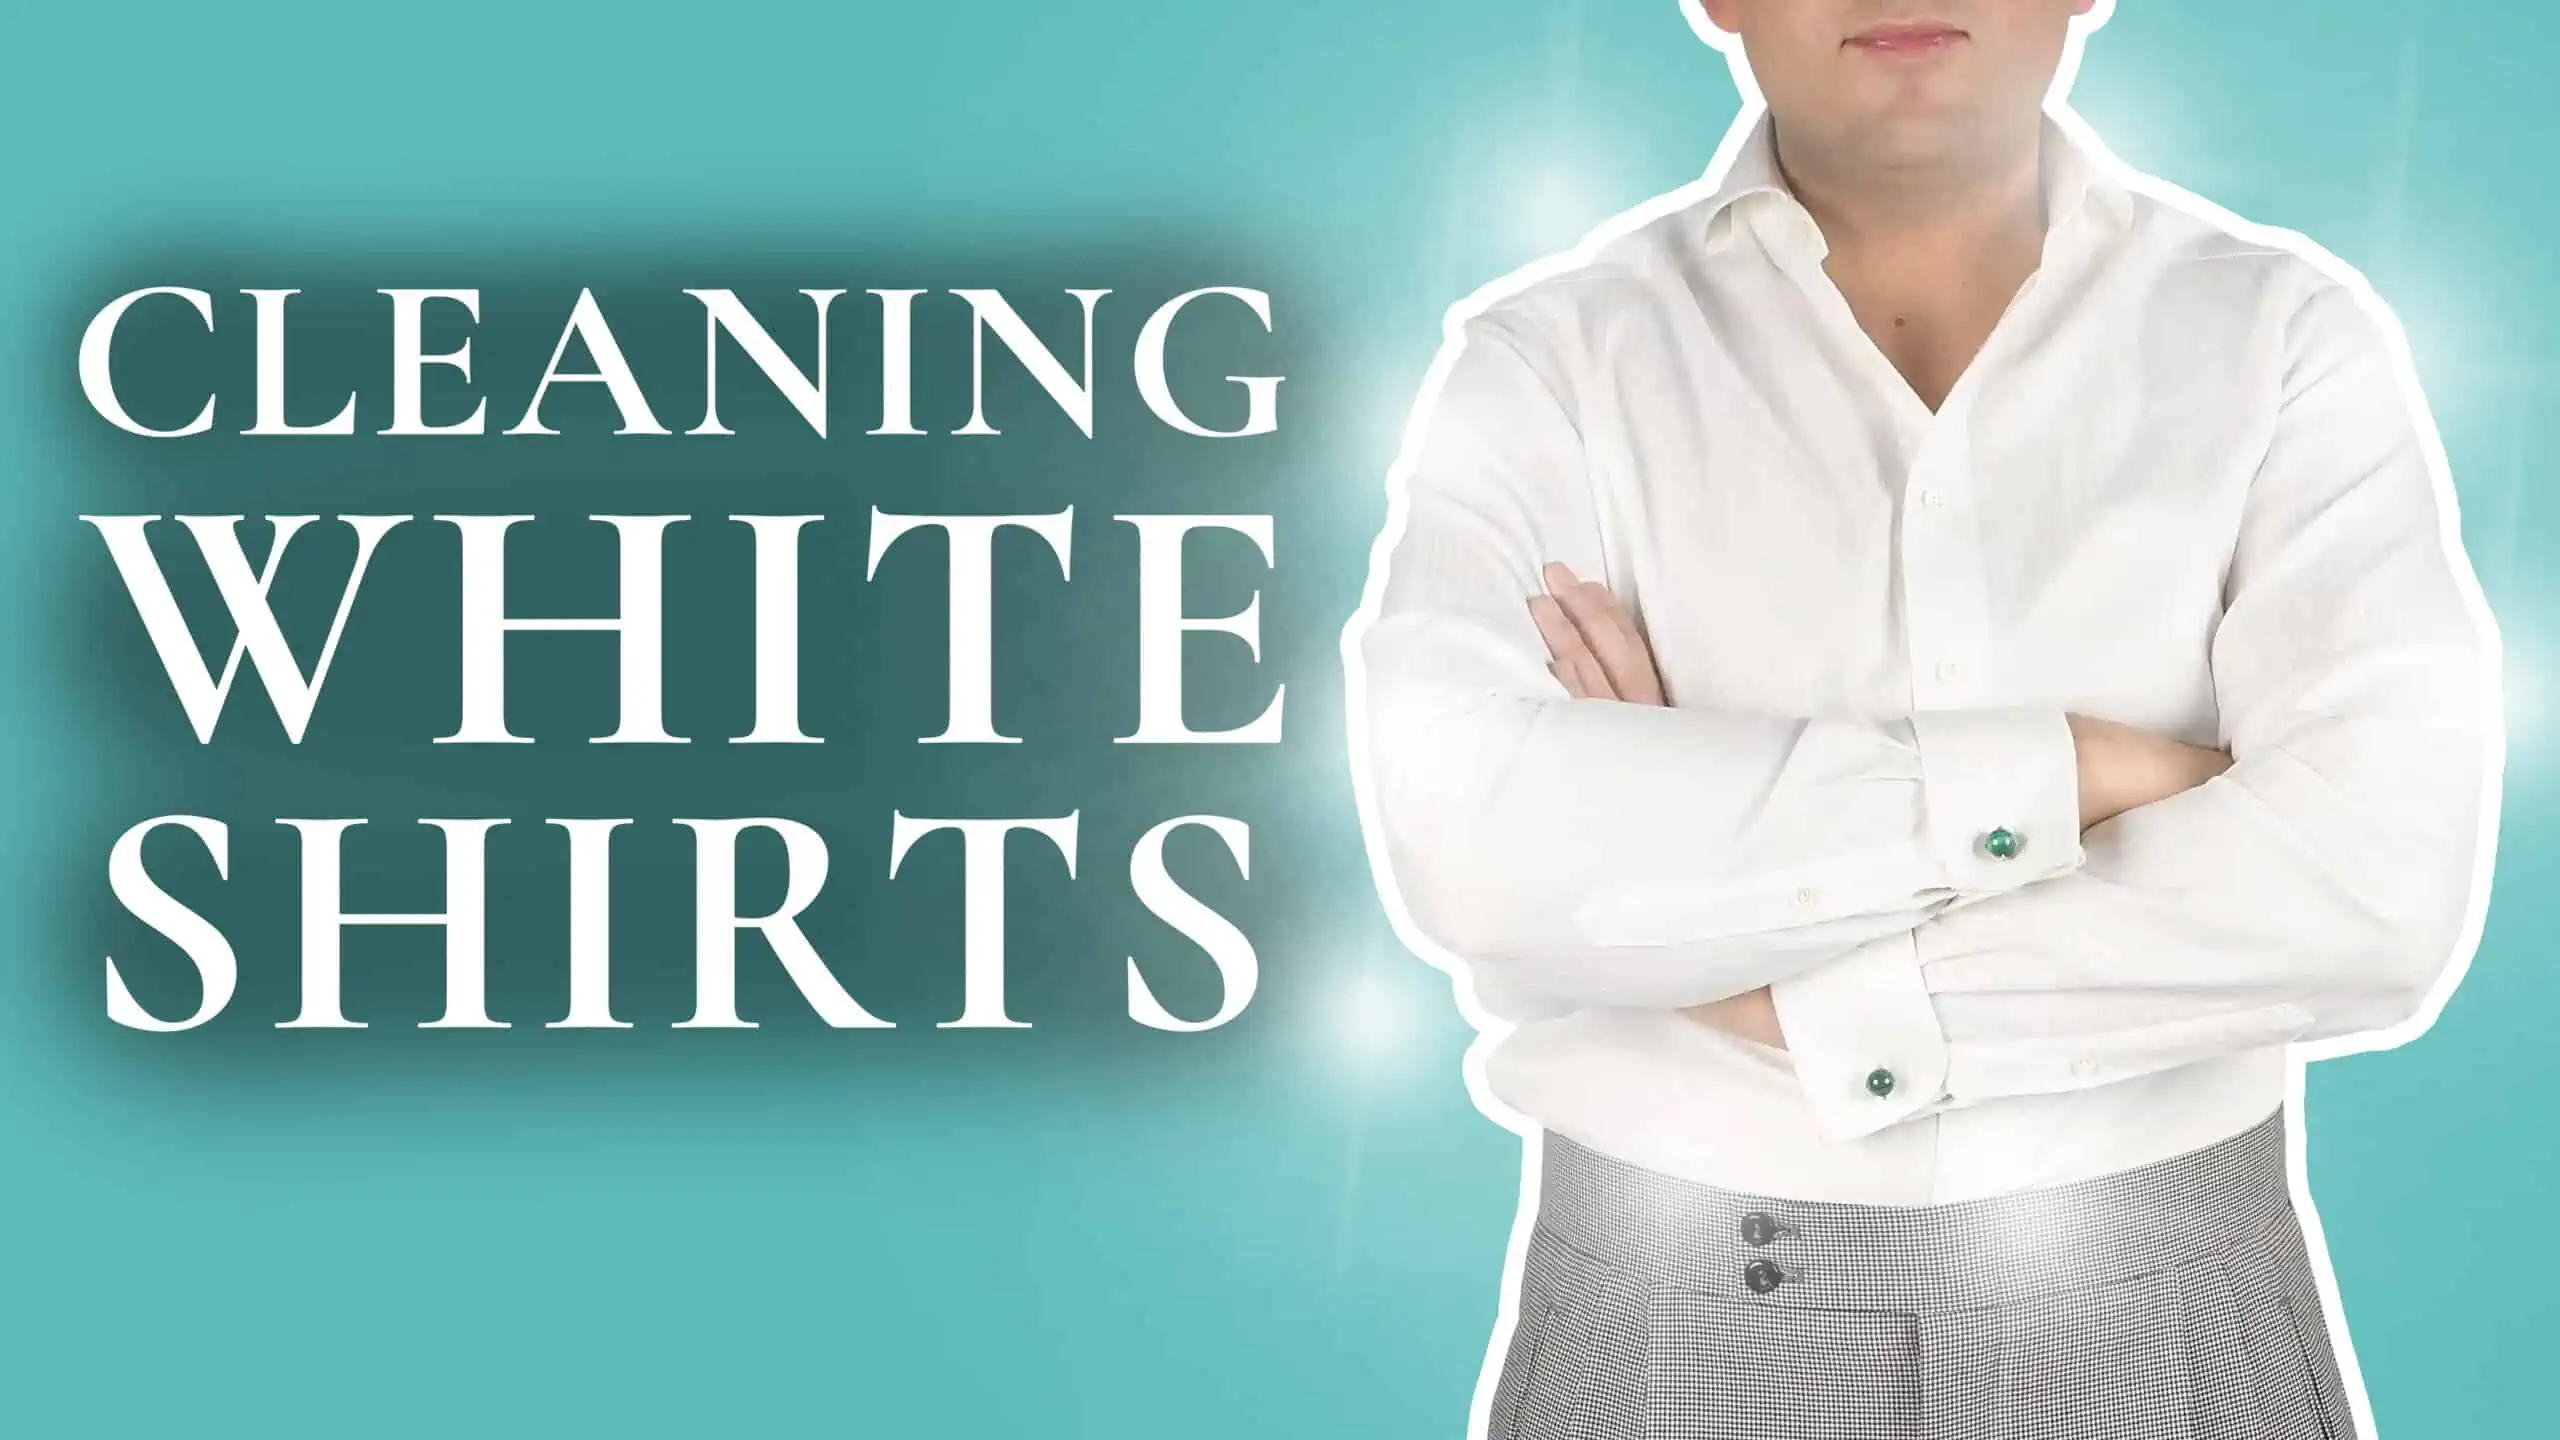 https://www.gentlemansgazette.com/wp-content/uploads/2023/04/cleaning-white-shirts_3840x2160-scaled.webp